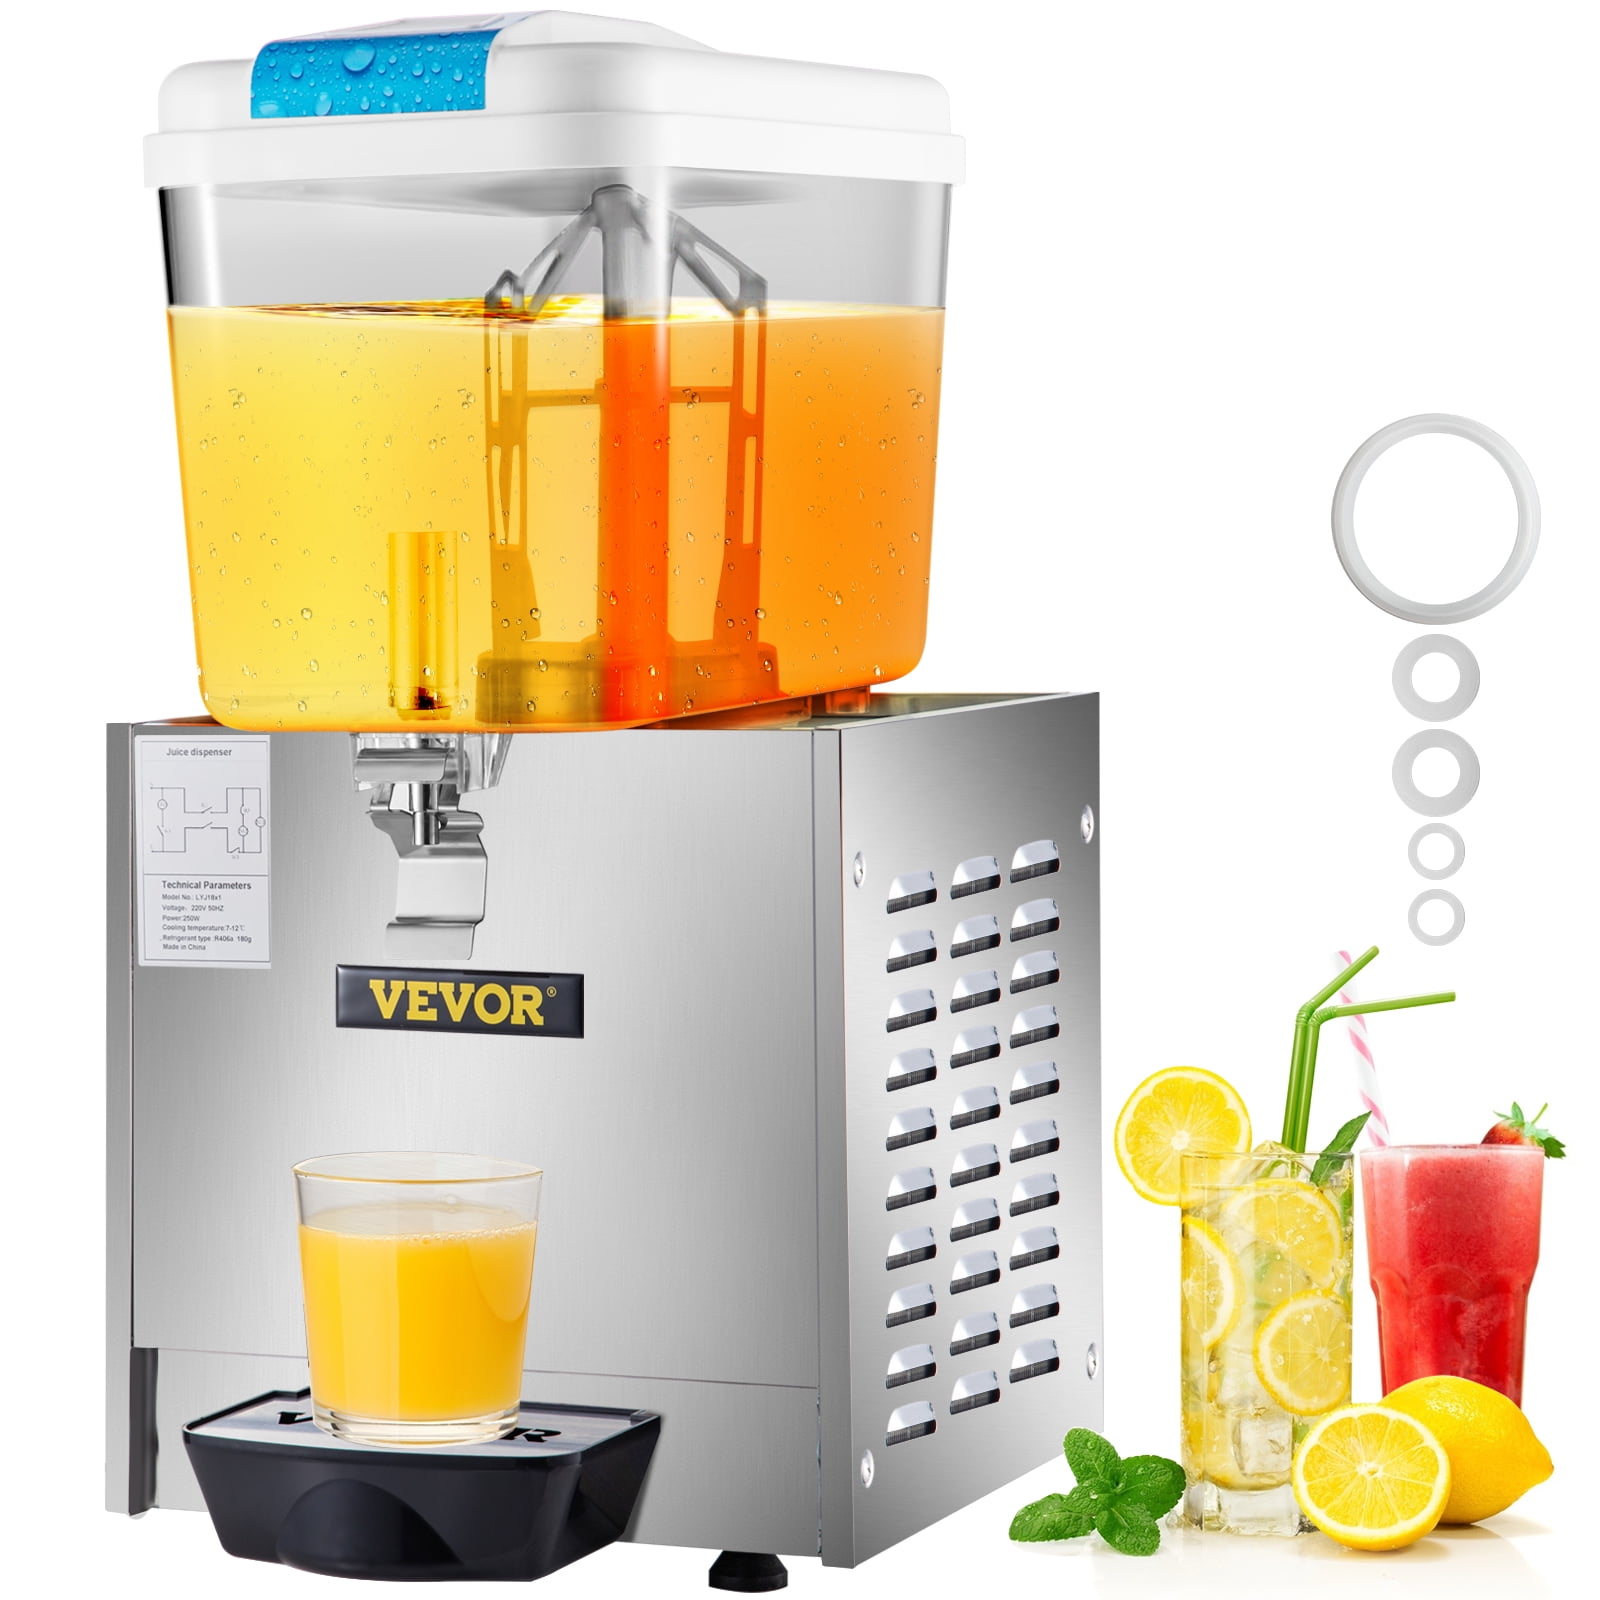 VEVOR Commercial Cold Beverage 2 Tanks 6.4 Gallon Stainless Steel Fruit Juice Dispensers 150W Ice Tea Drink Machine 110V Premium Equipped with Thermostat Controller for Restaurant Party 24L Silver 